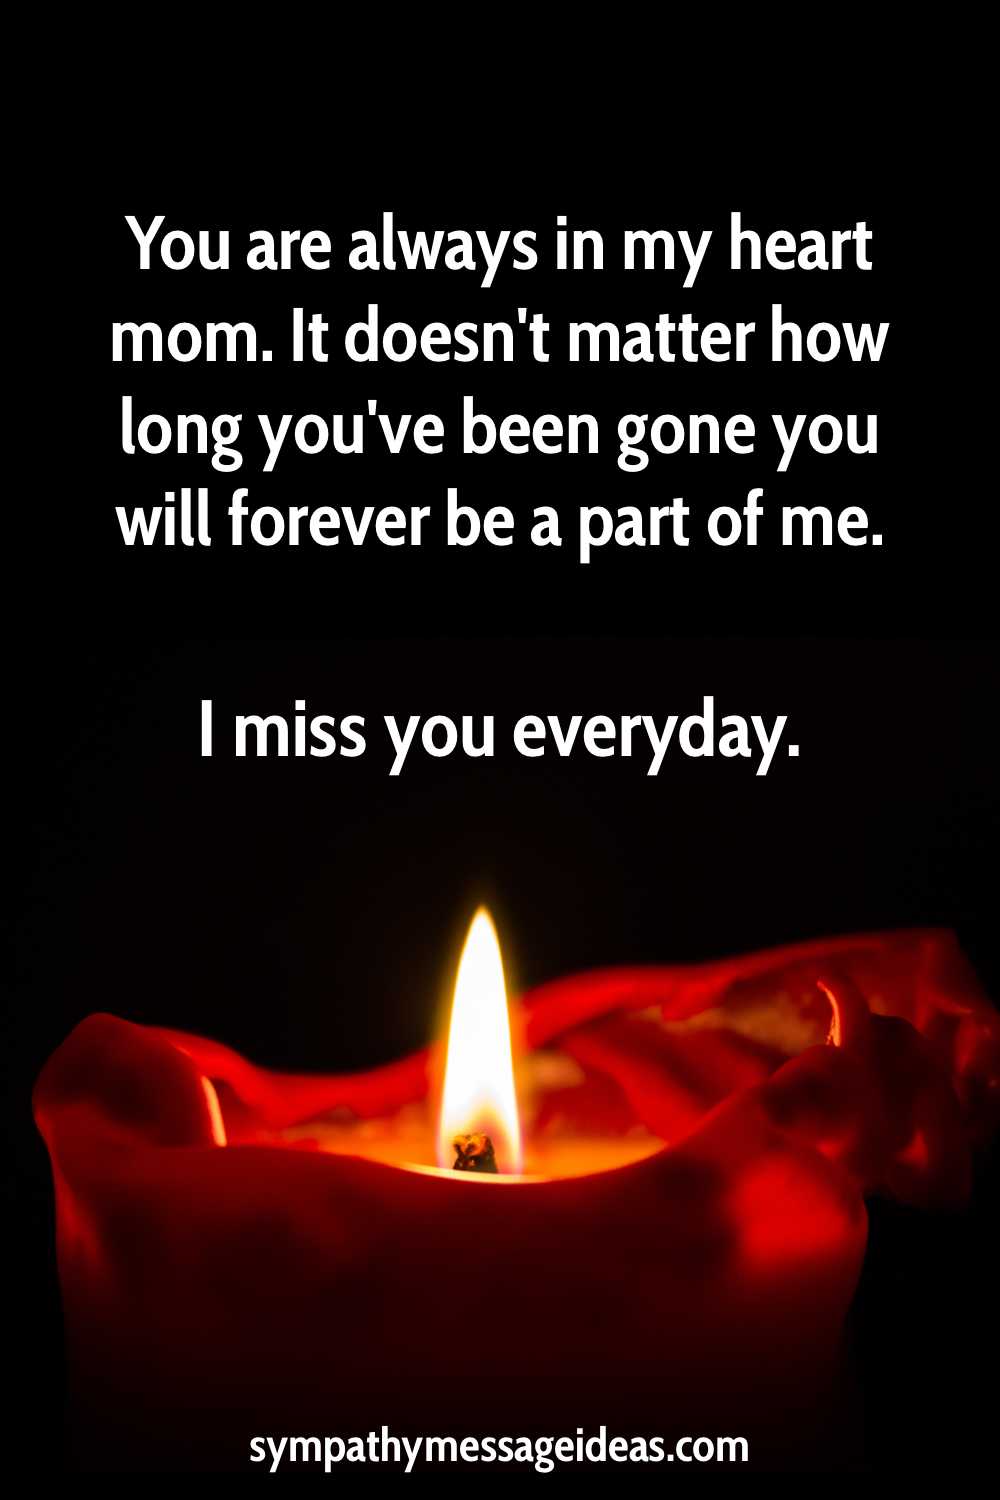 missing you mom quotes